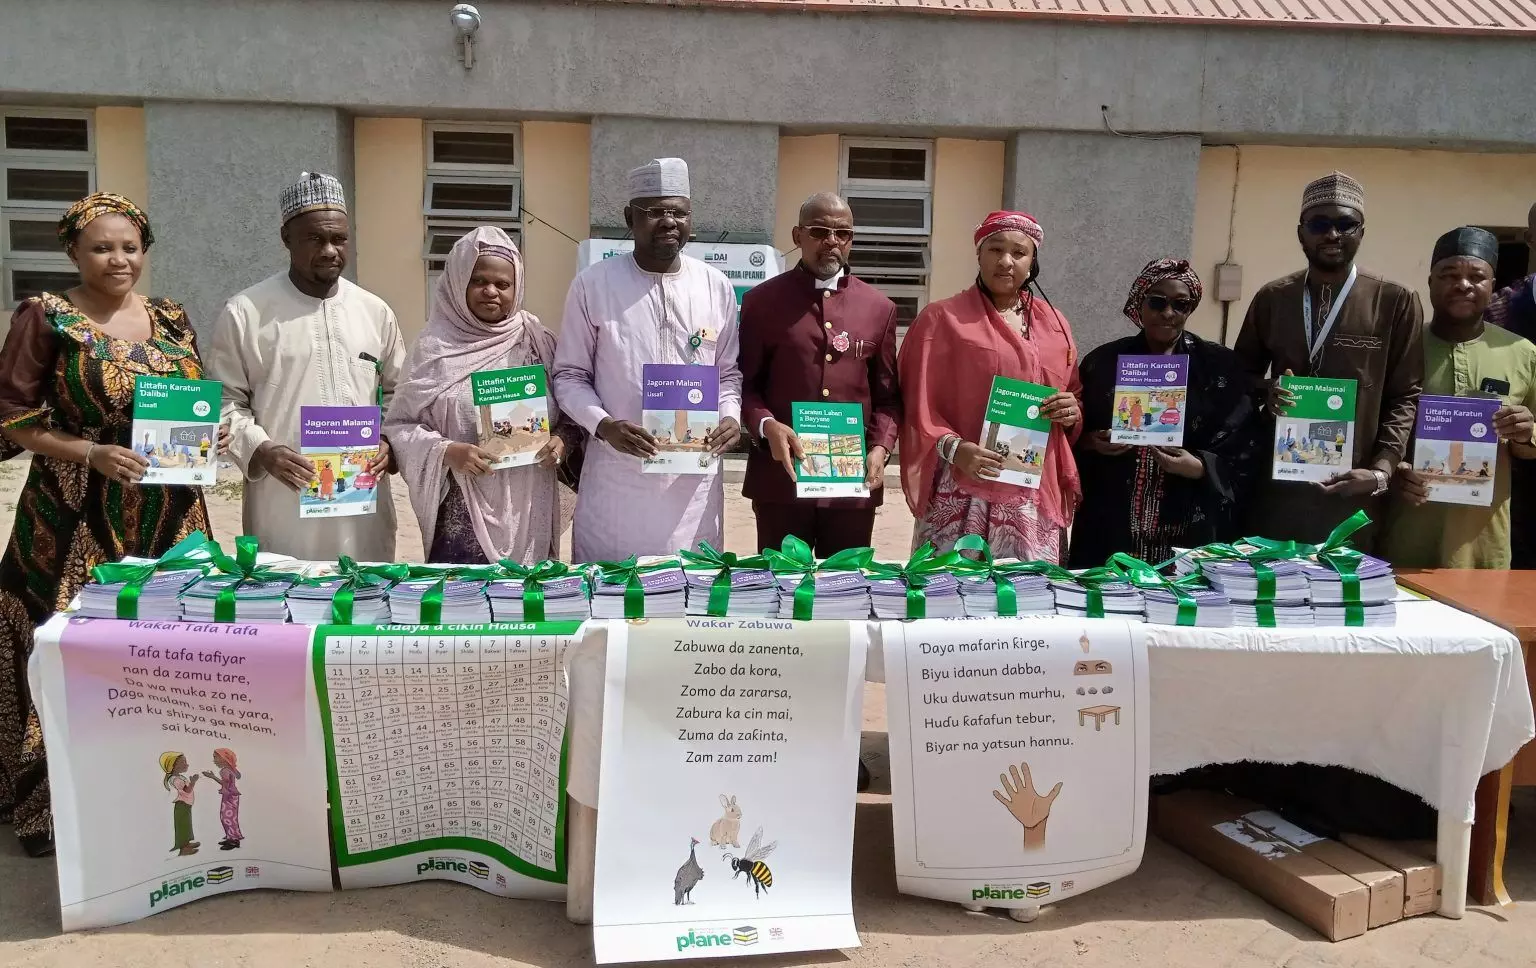 PLANE provides educational materials to primary schools in Kaduna